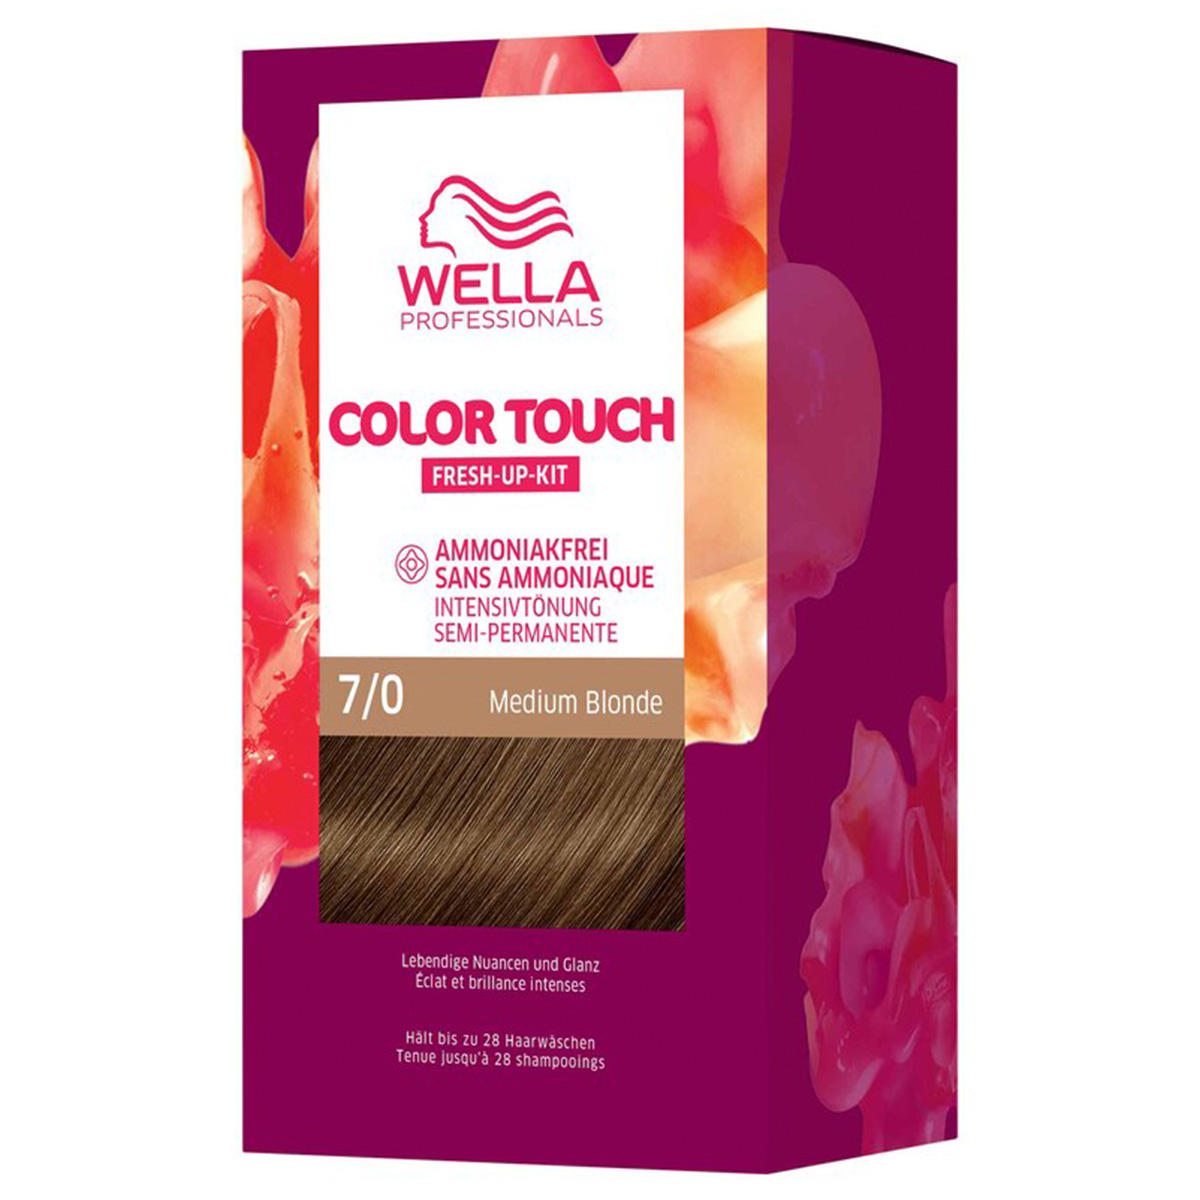 Wella Color Touch Fresh-Up-Kit 7/0 Biondo medio 130 ml - 1